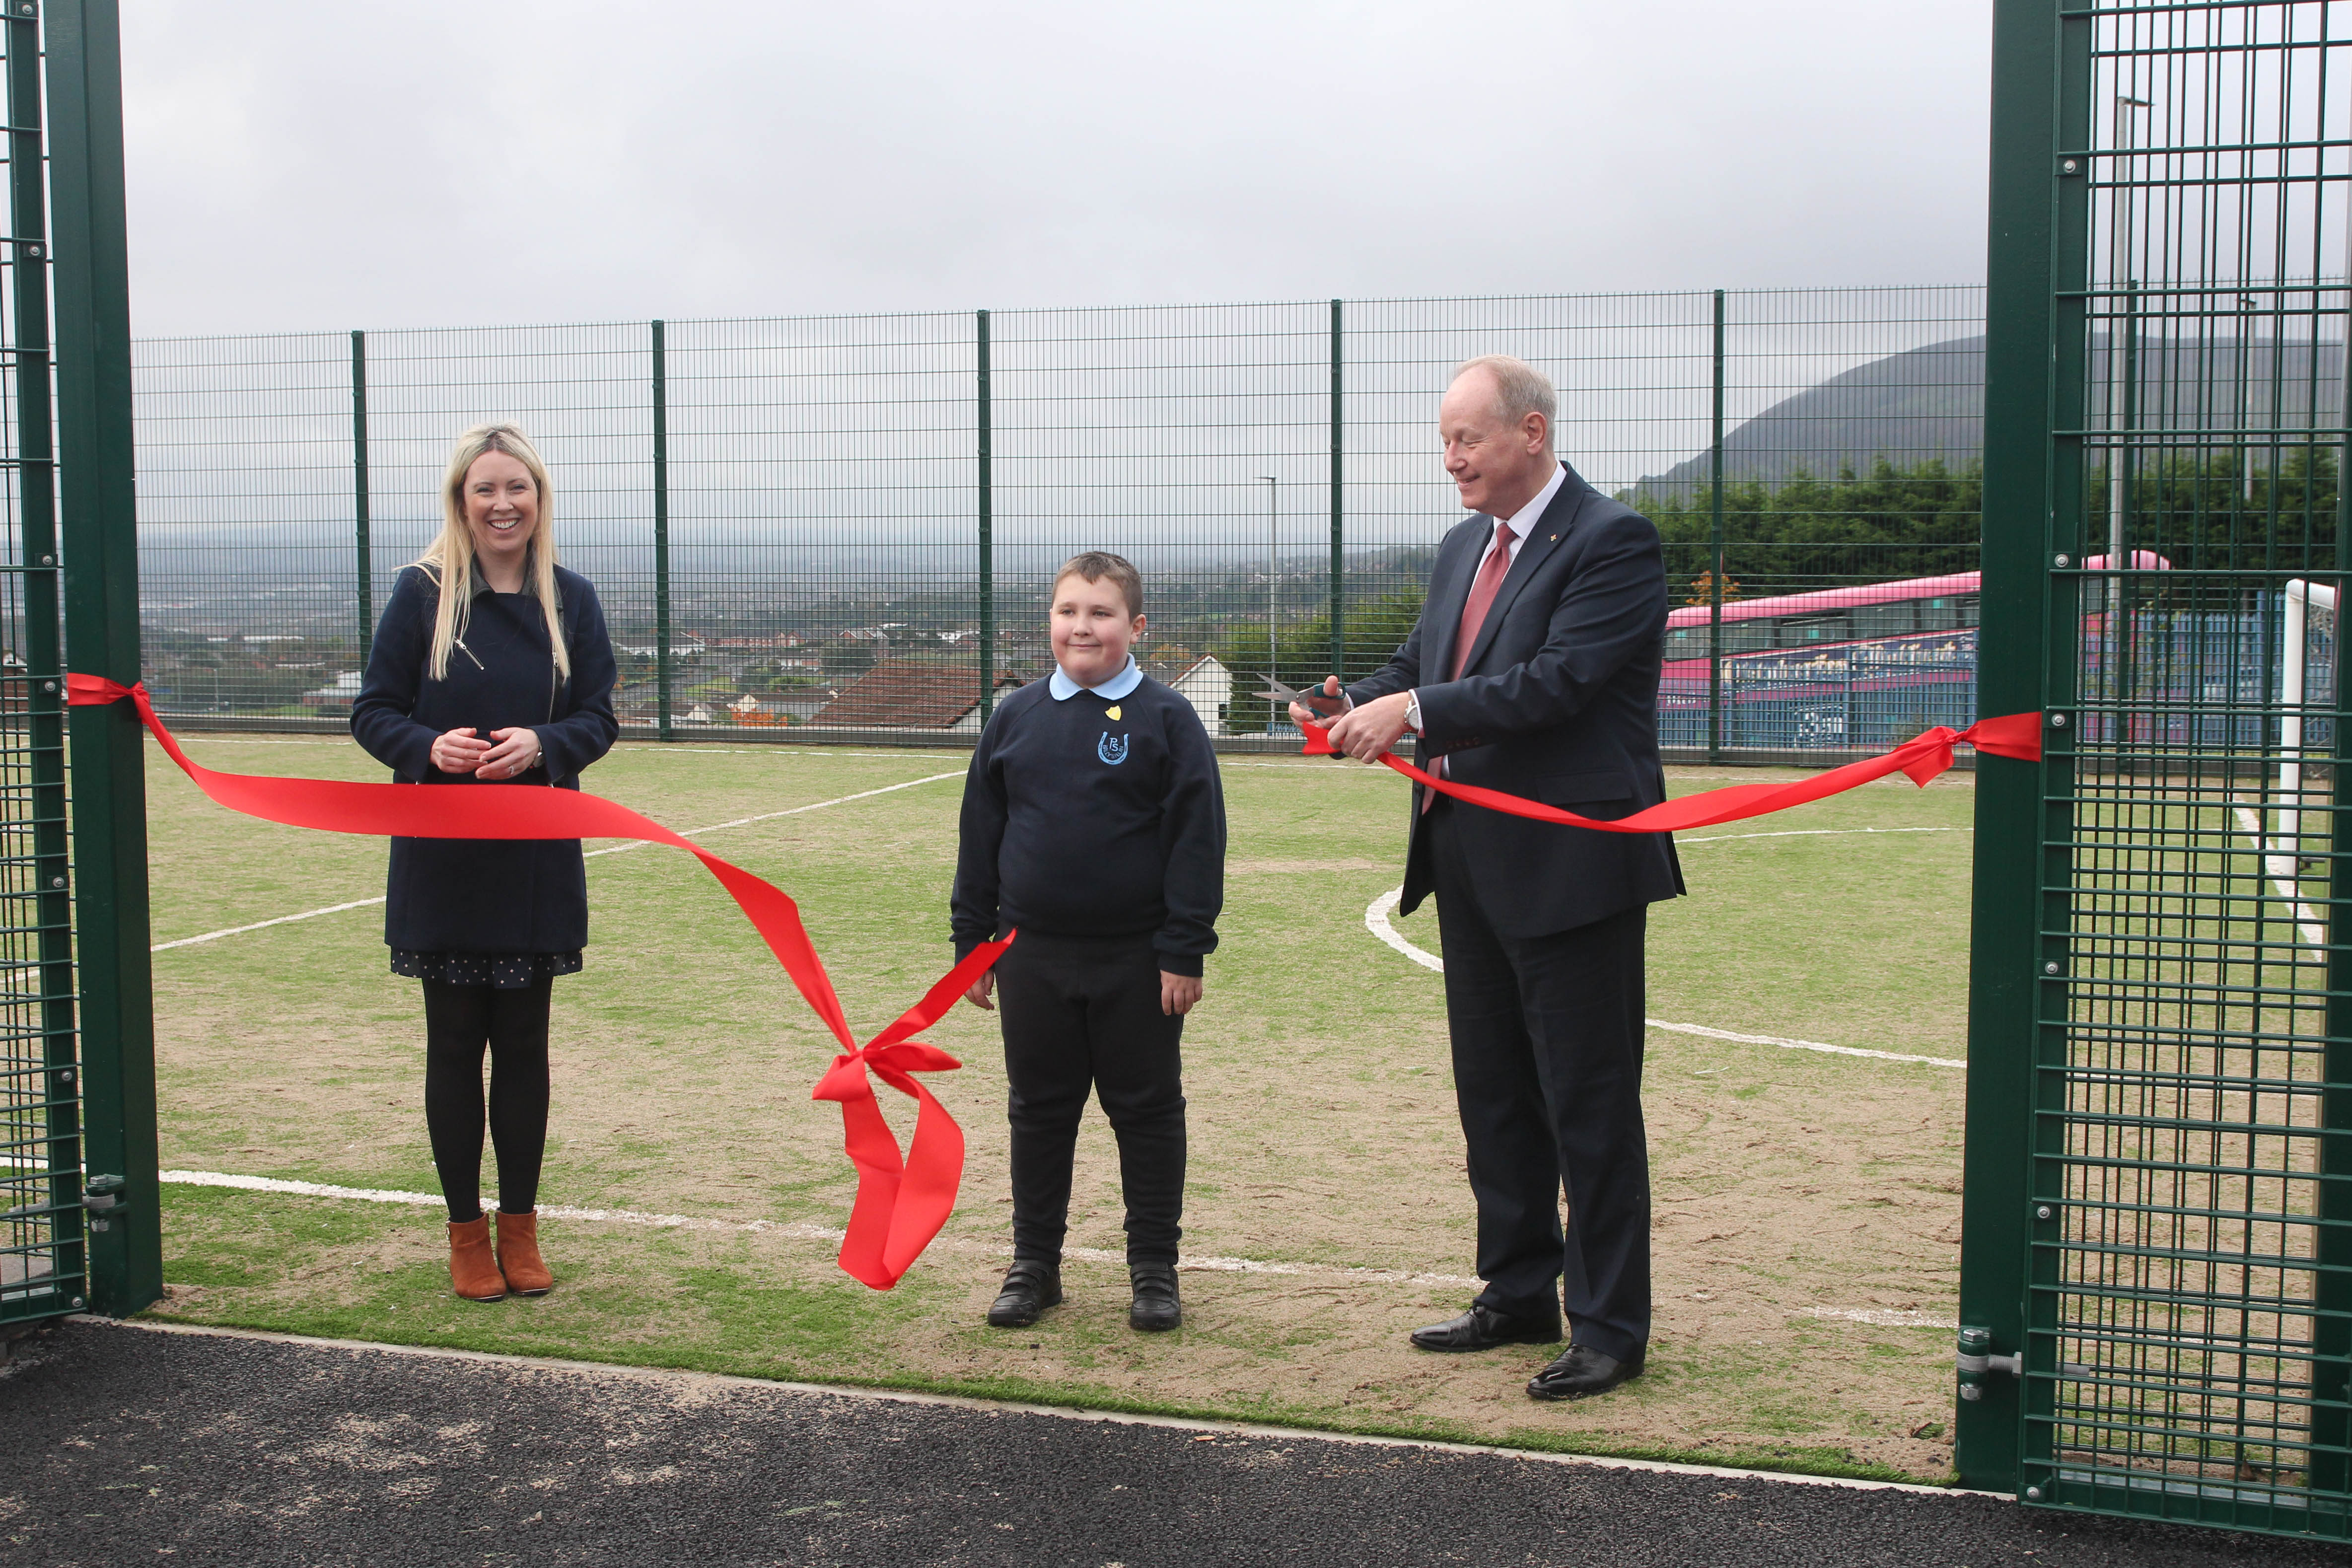 PLAYGROUND IMPROVEMENTS: William Humphrey MLA officially opens the new MUGA pitch and other playground enhancements at Ballysillan Primary School alongside Acting Principal Catherine Davidson and P7 pupil Mason.  